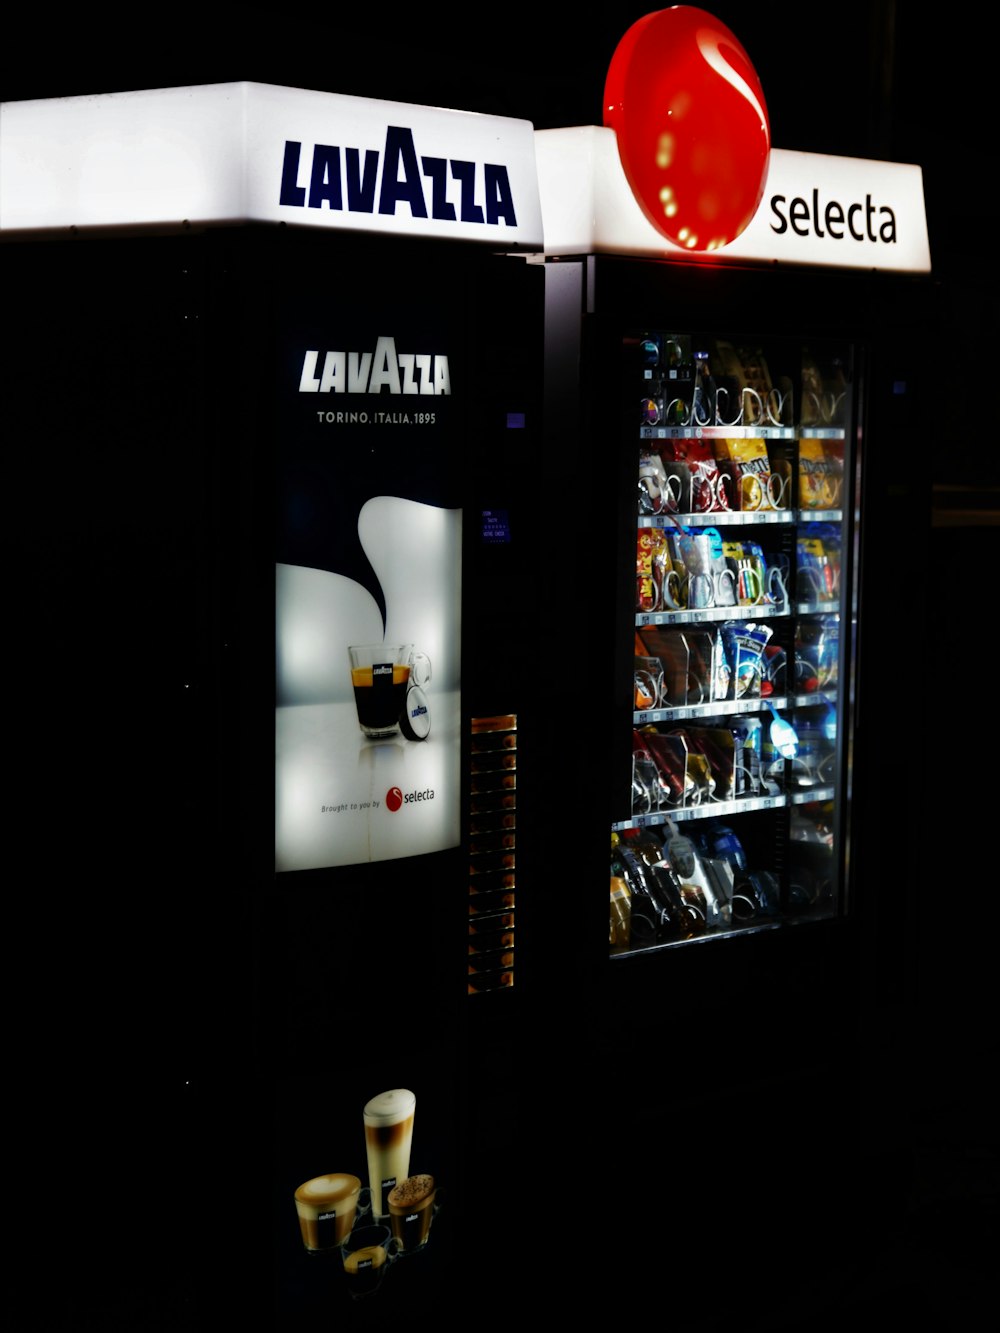 a vending machine is lit up at night